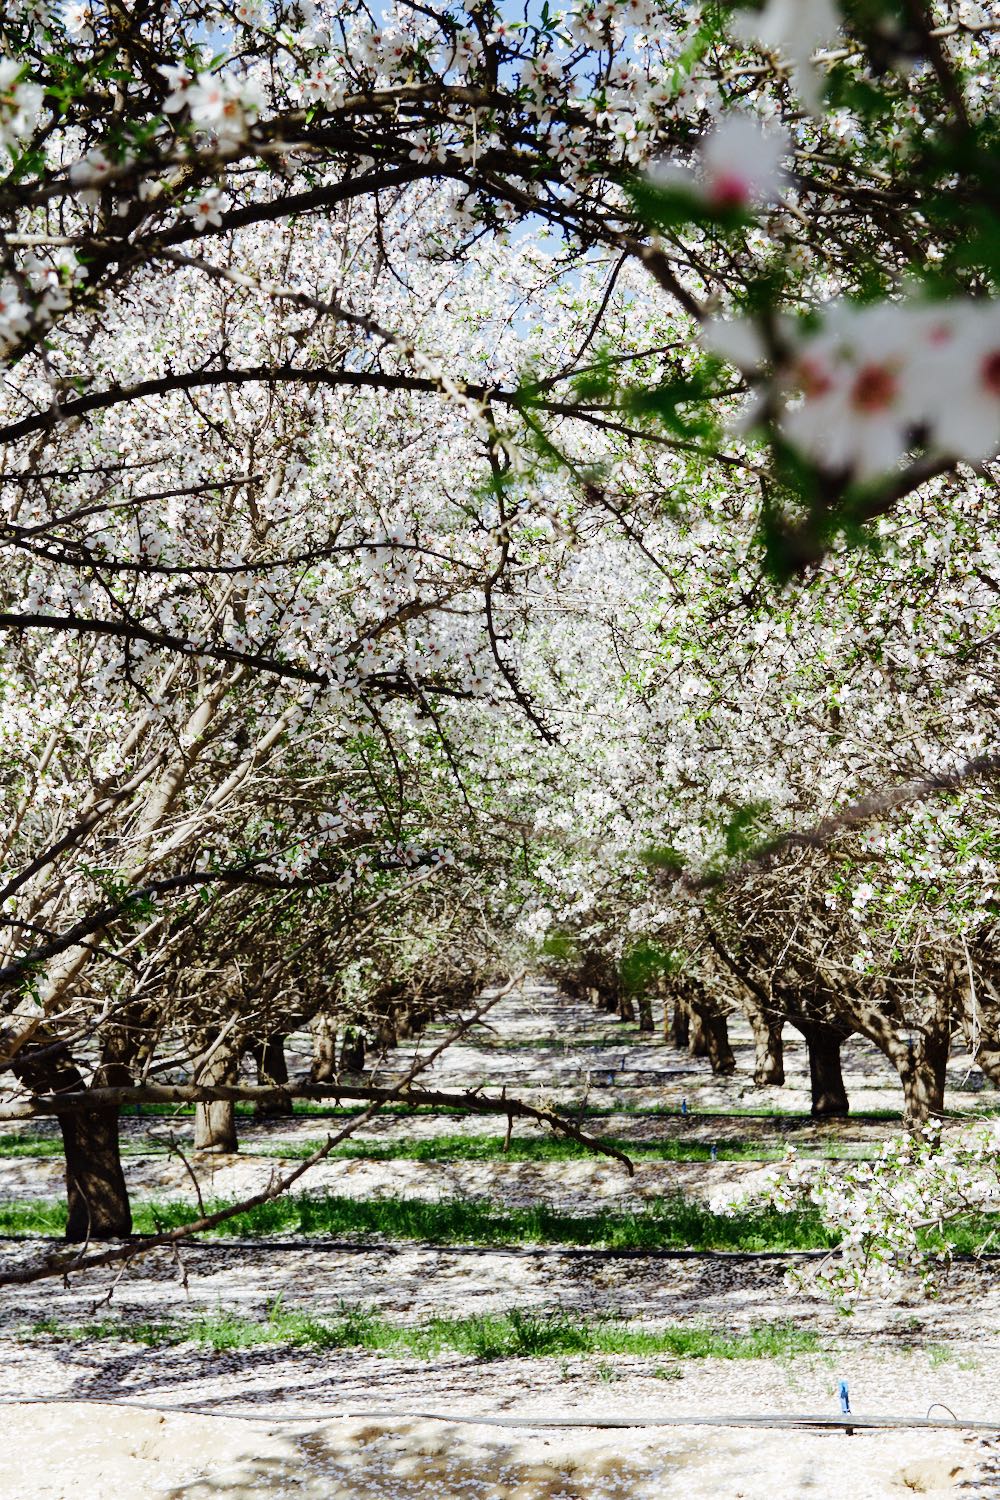 Almond blossoms in bloom